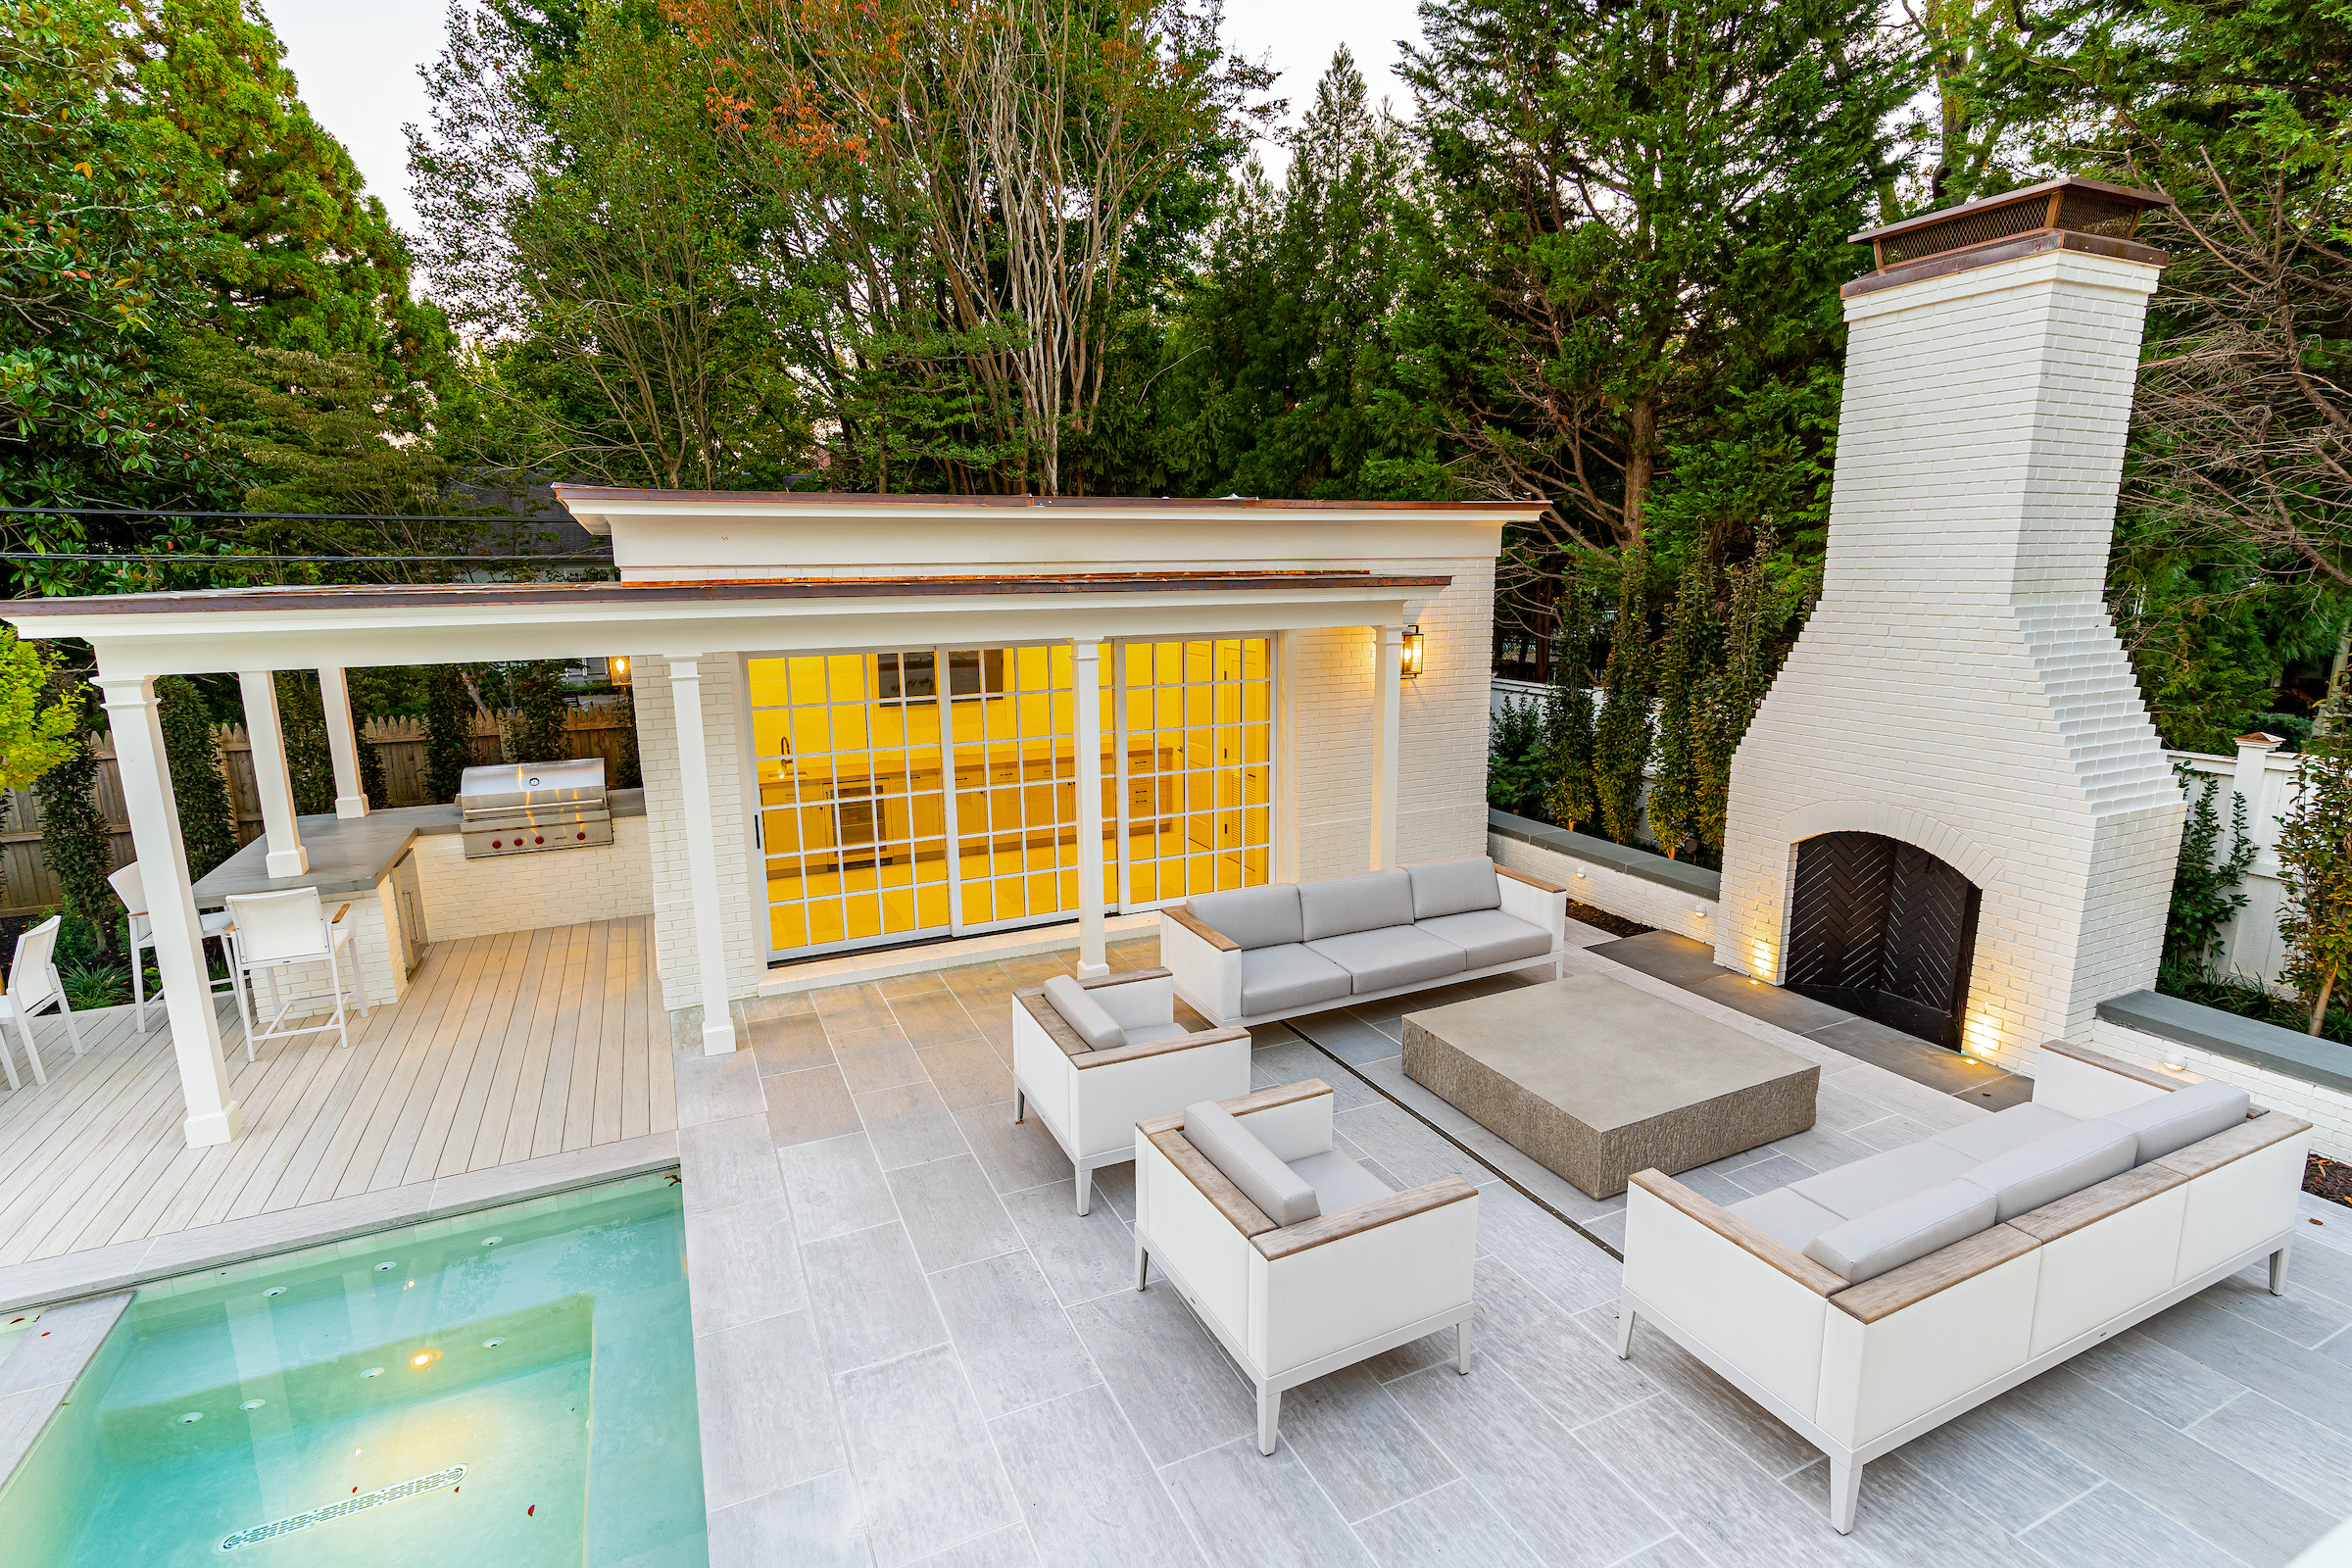 Luxurious Outdoor Space with Seating Area, Fireplace, Outdoor Kitchen, and Pool